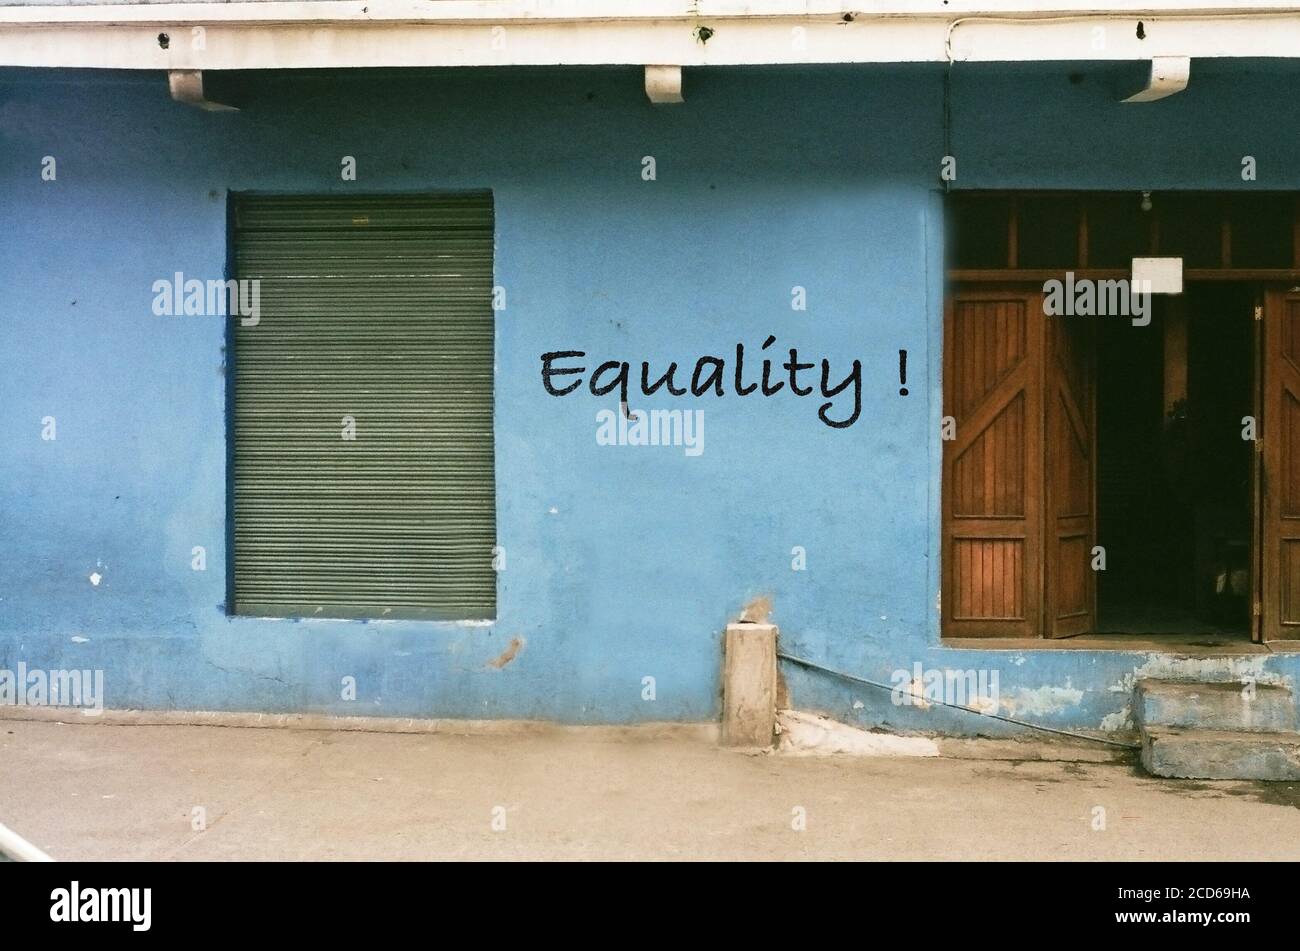 Equality ! written on blue wall in a rural area of africa Stock Photo